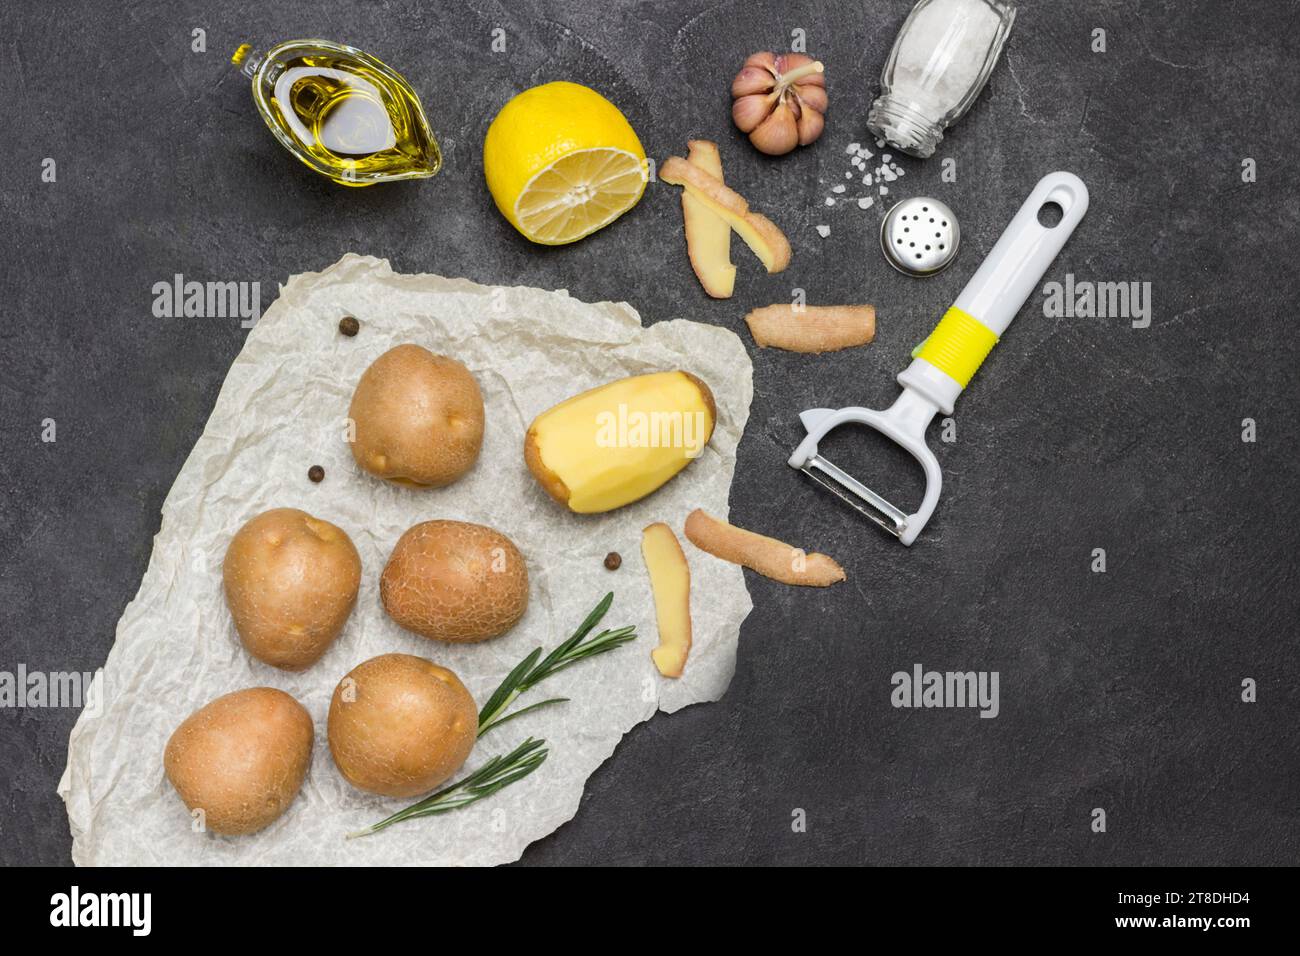 https://c8.alamy.com/comp/2T8DHD4/raw-potatoes-and-one-peeled-potato-on-white-paper-with-rosemary-green-pepper-and-lemon-black-background-flat-lay-copy-space-2T8DHD4.jpg